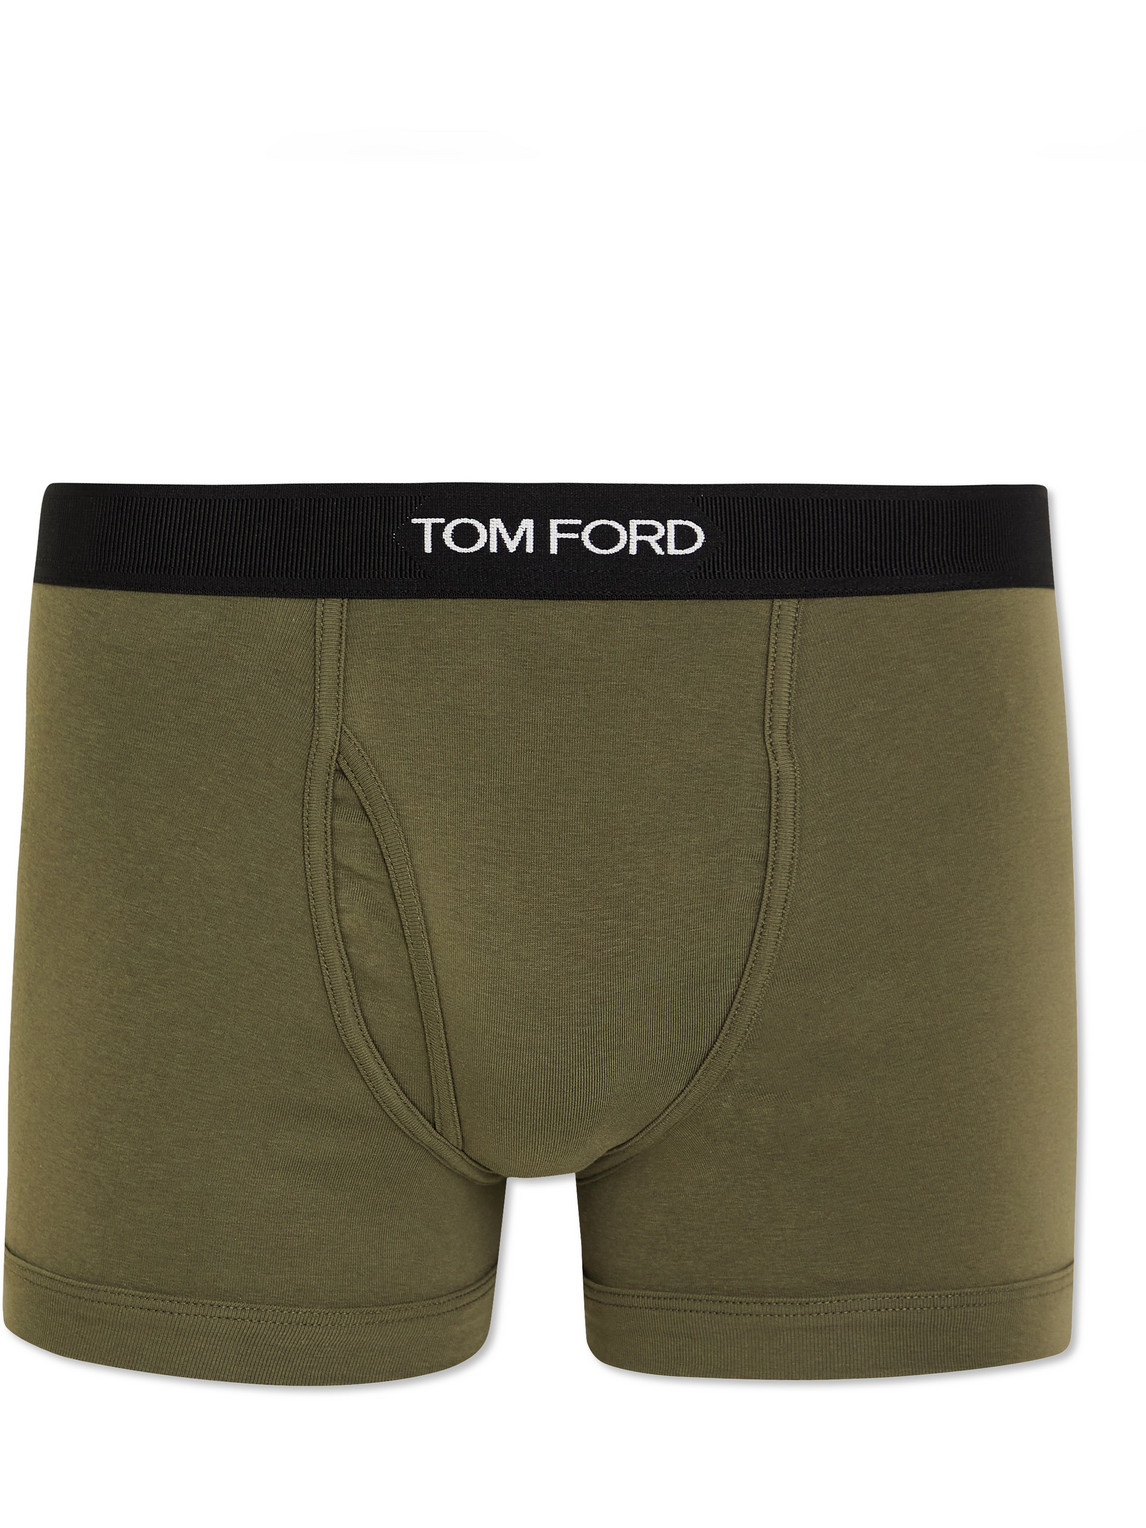 TOM FORD STRETCH-COTTON JERSEY BOXER BRIEFS